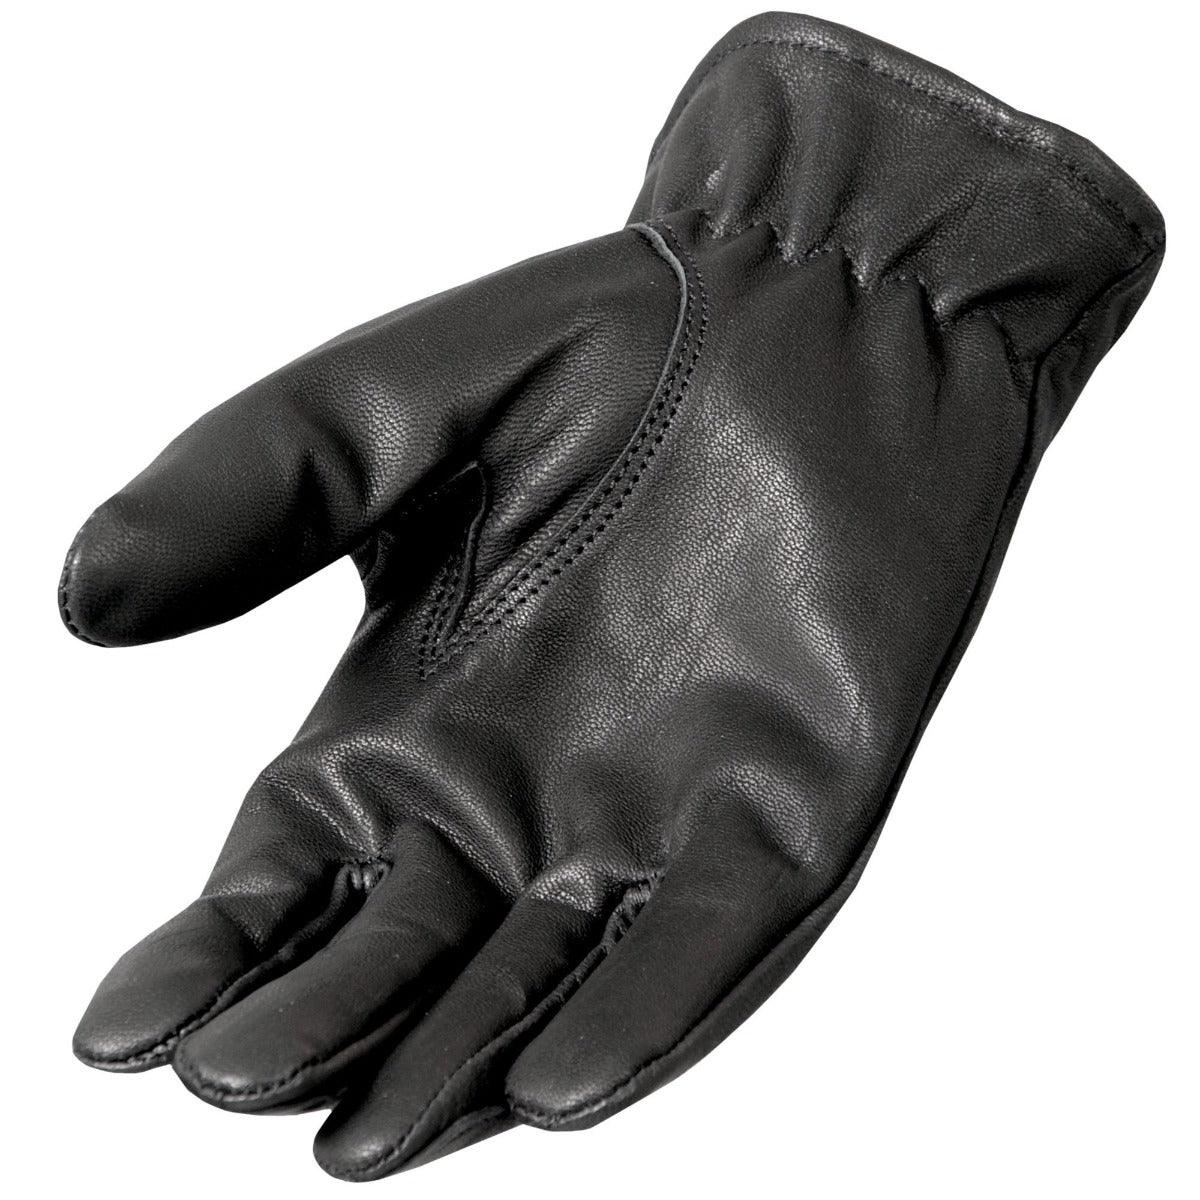 Hot Leathers Fleece Lined Leather Glove - American Legend Rider